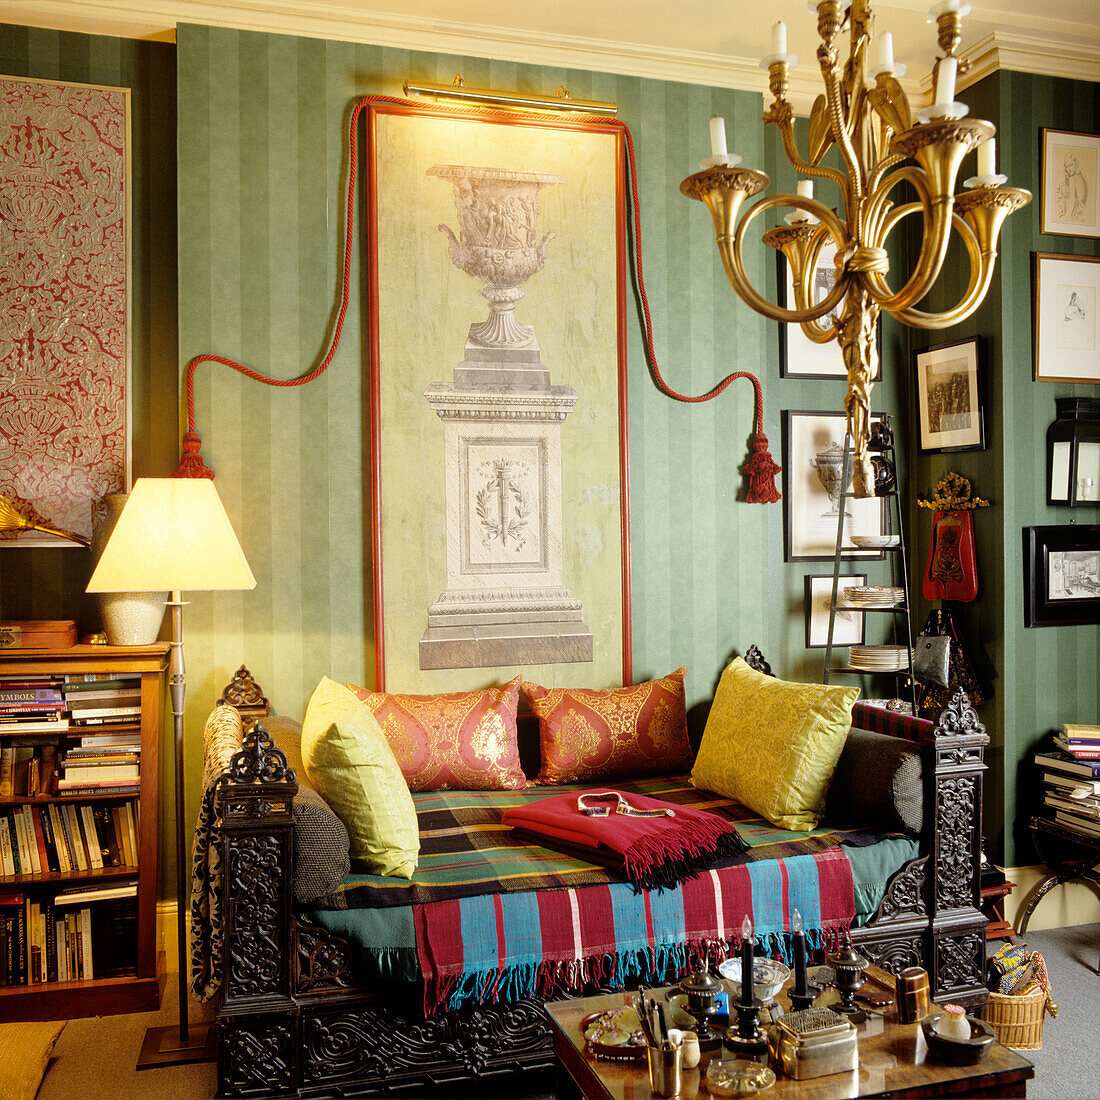 Living room with green striped wallpaper, antique furniture and colorful textiles